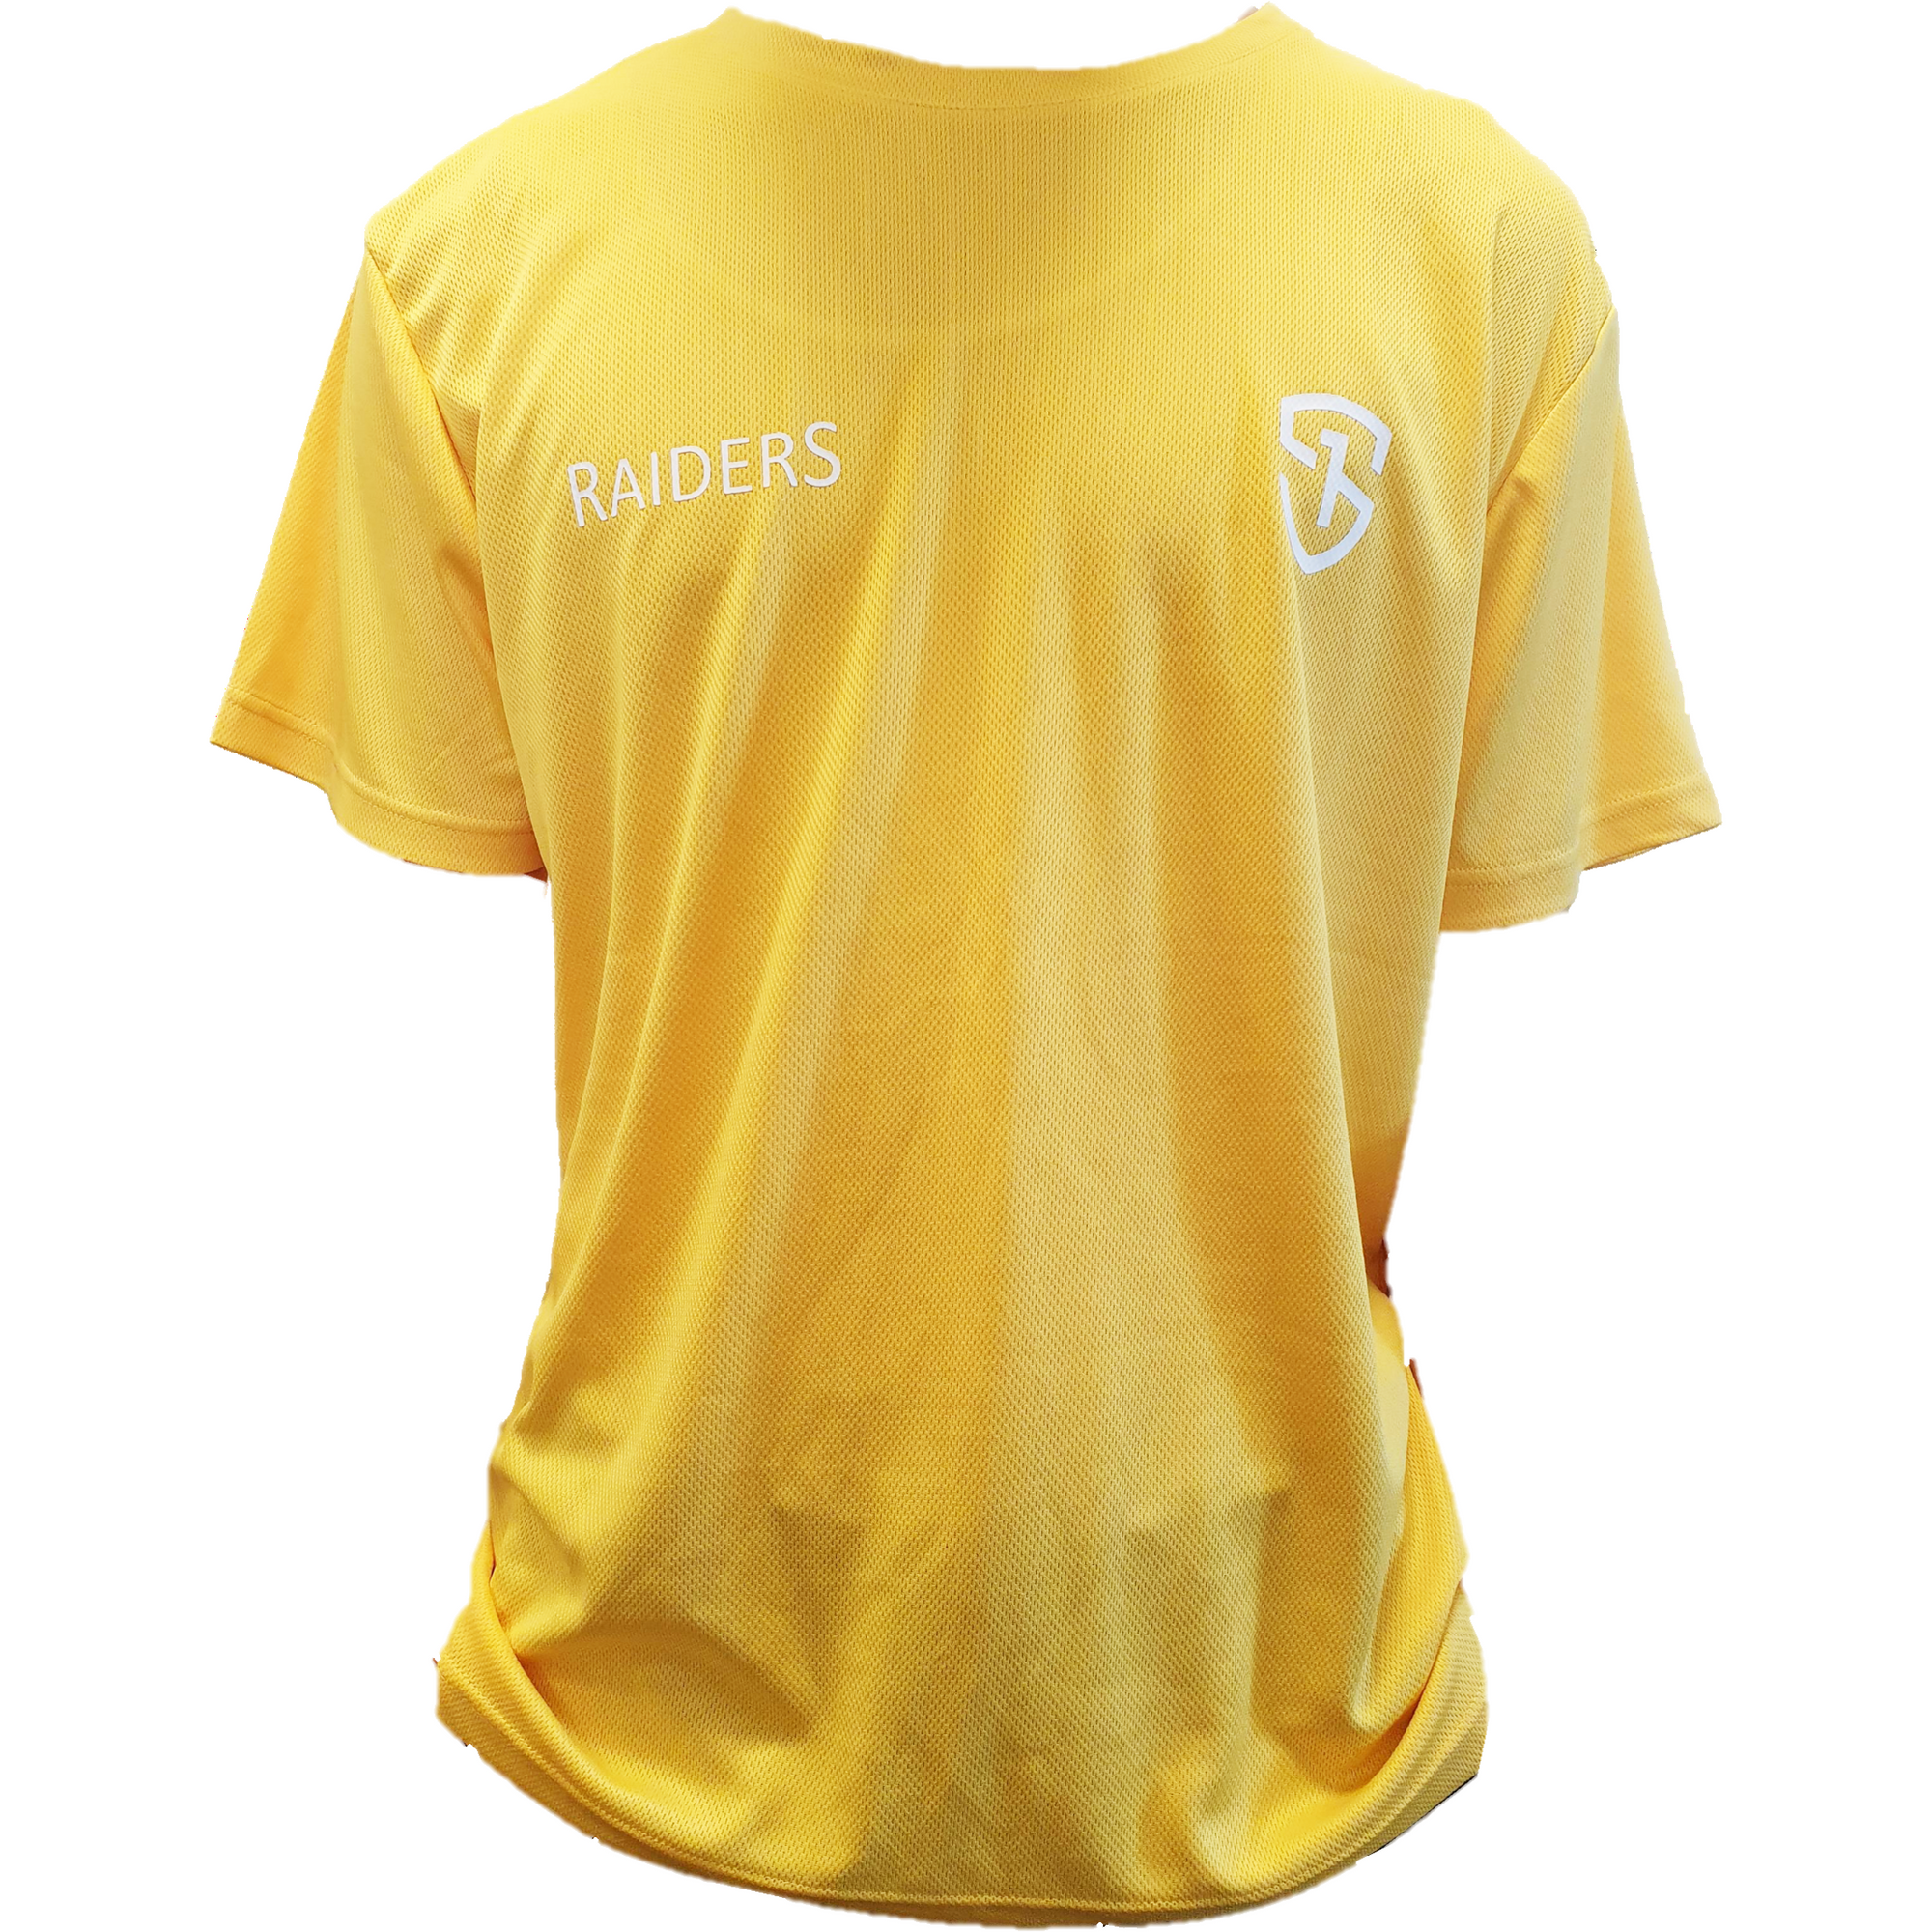 House Team Sports T-shirt Yellow Size 4